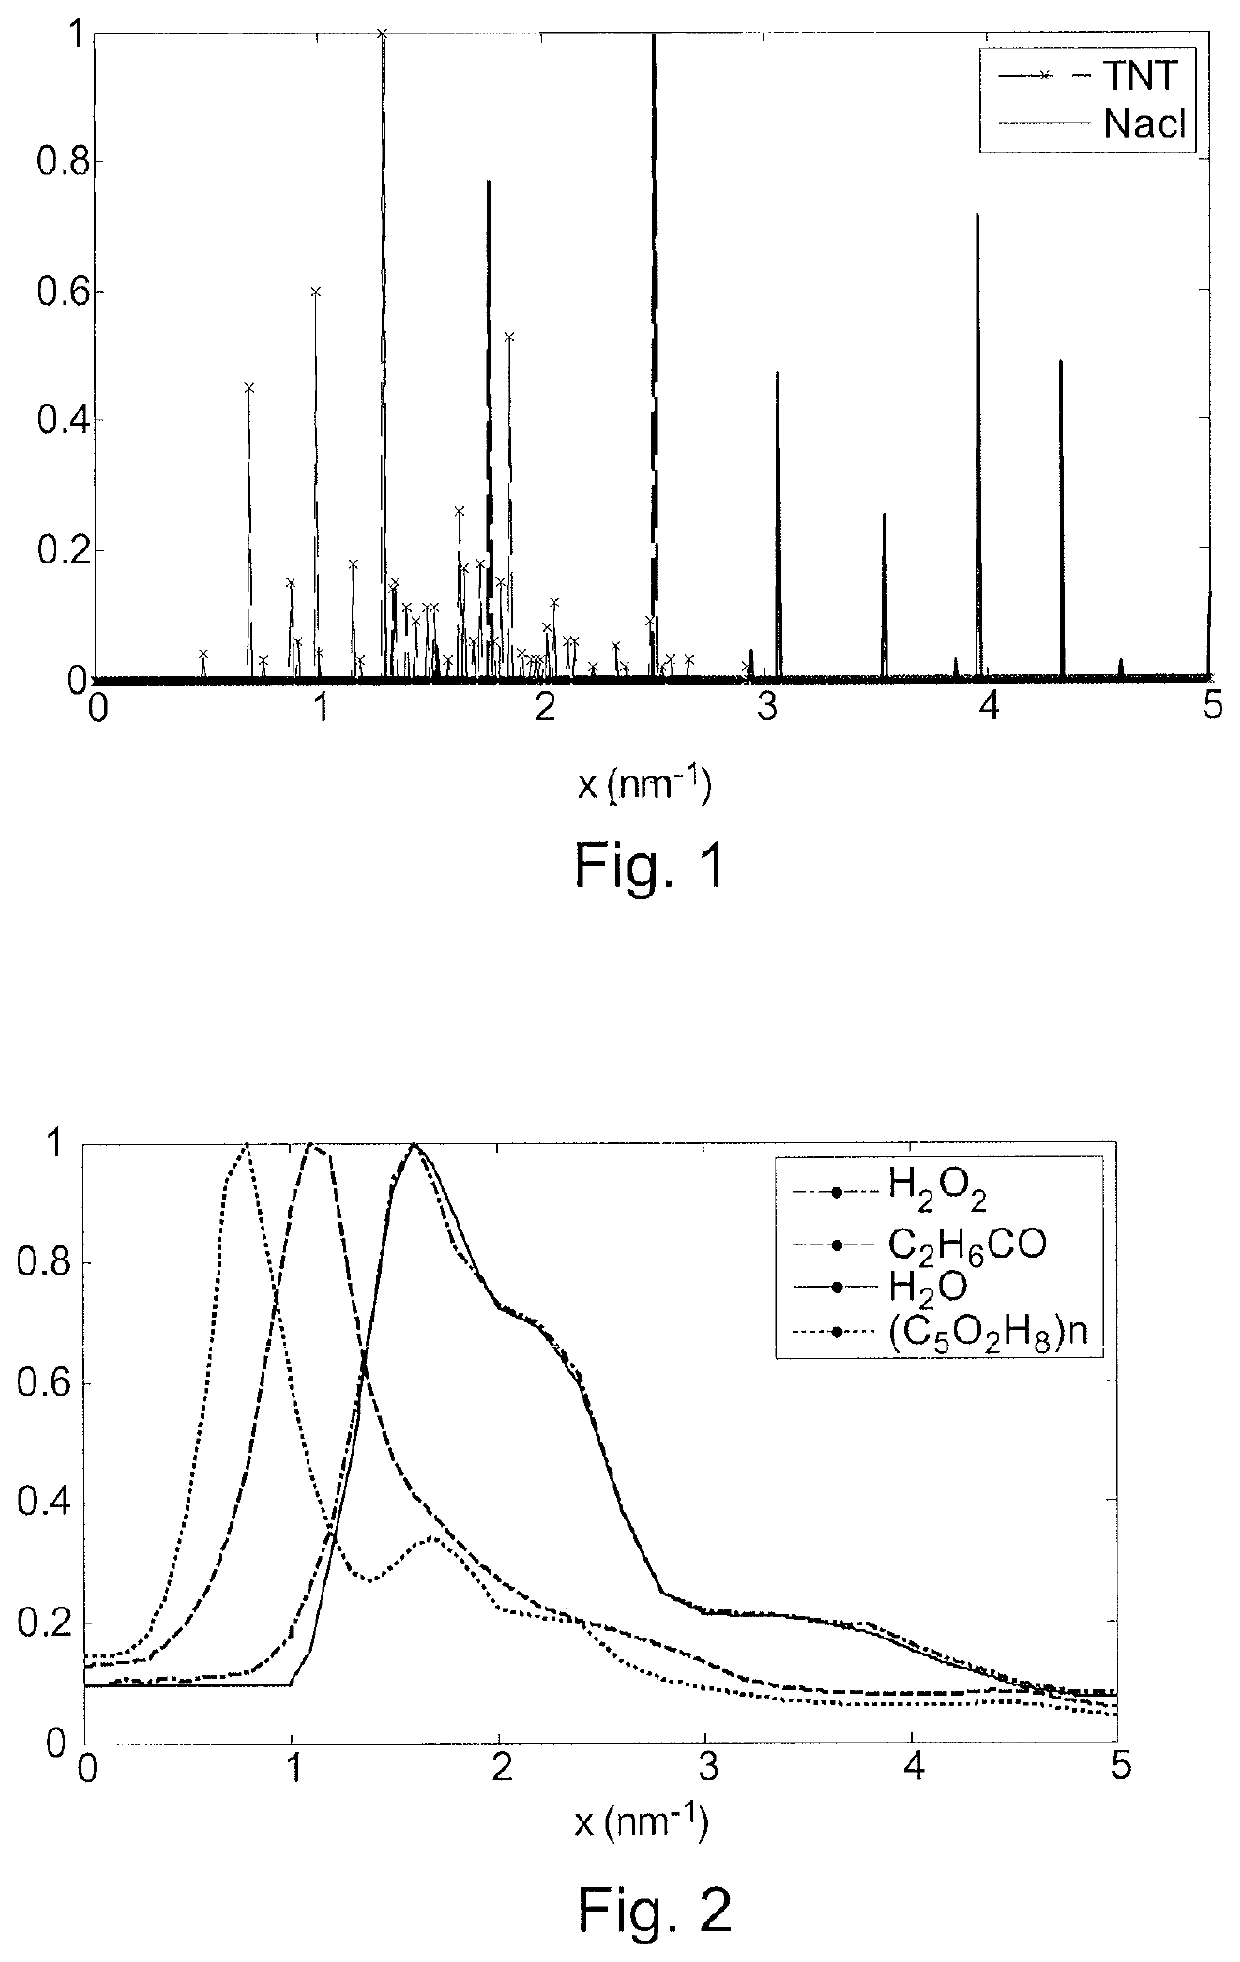 Method of analyzing an object in two stages using a transmission spectrum then a scattering spectrum